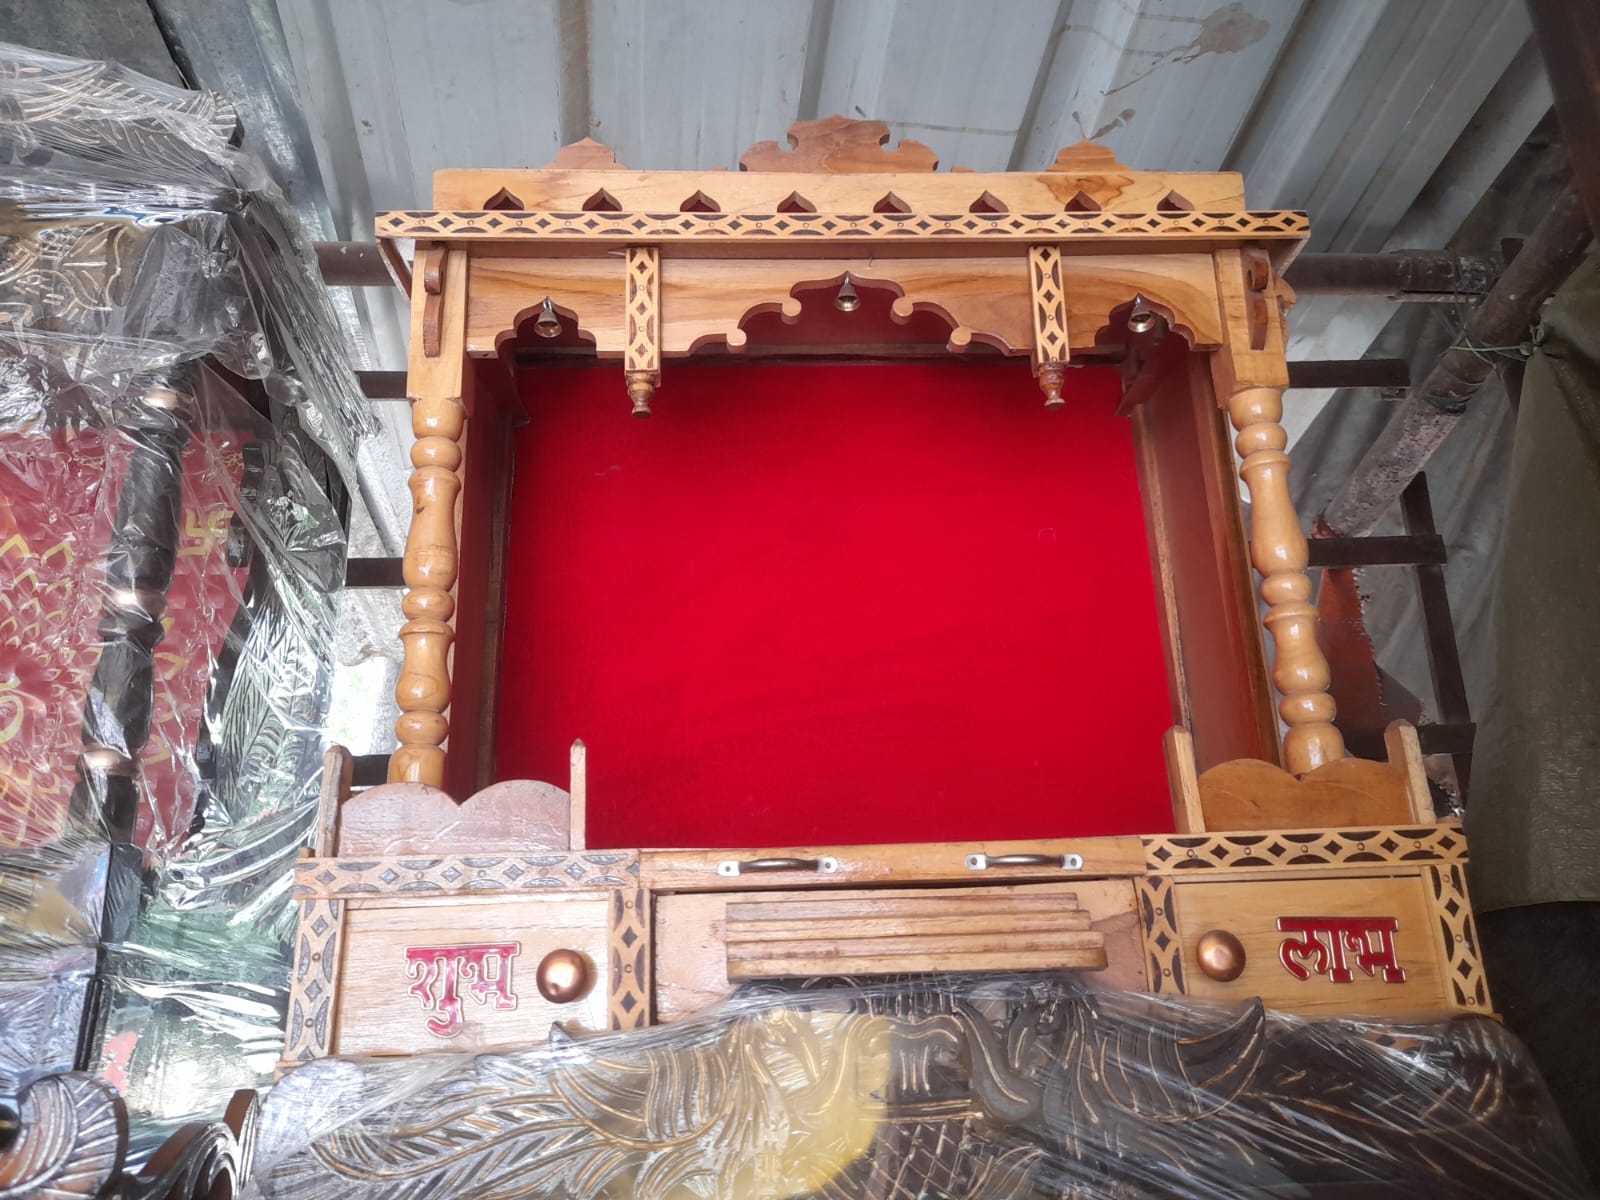 Special Story: For 4 years, a temple made of wood is being built on the roadside